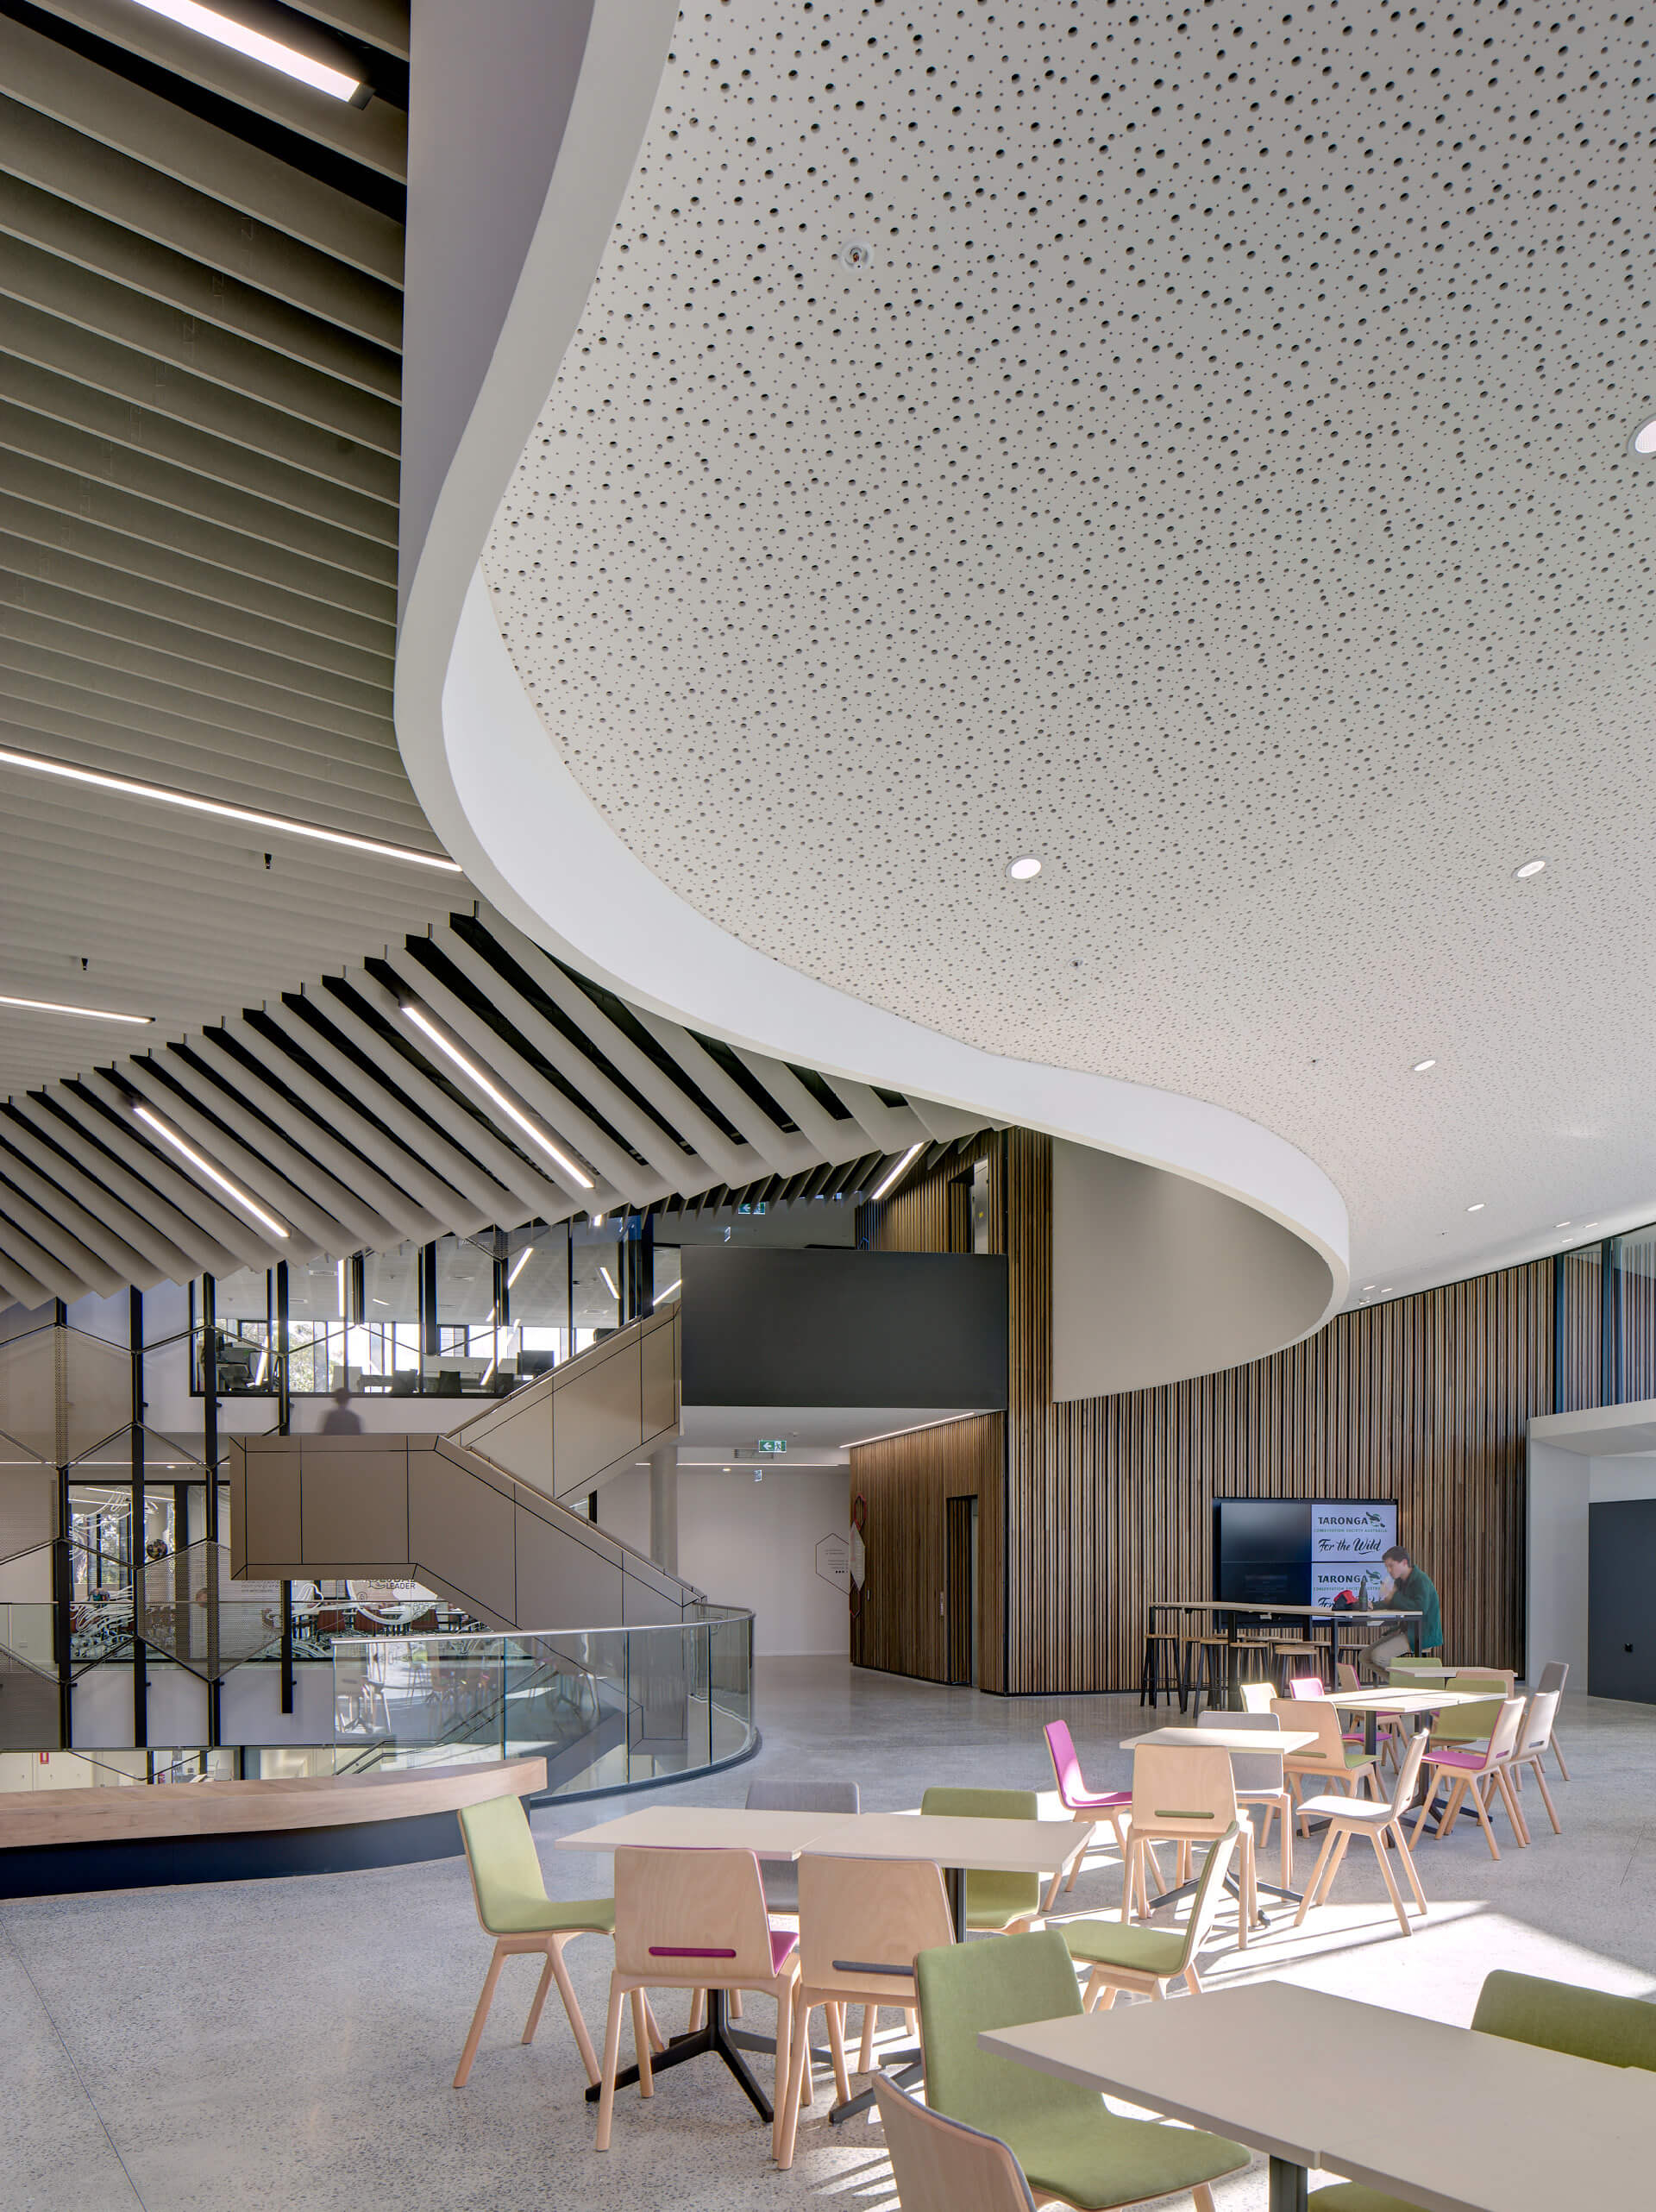 18 communal area with seating in central atrium with ceiling feature taronga zoo institute sydney taylor construction education